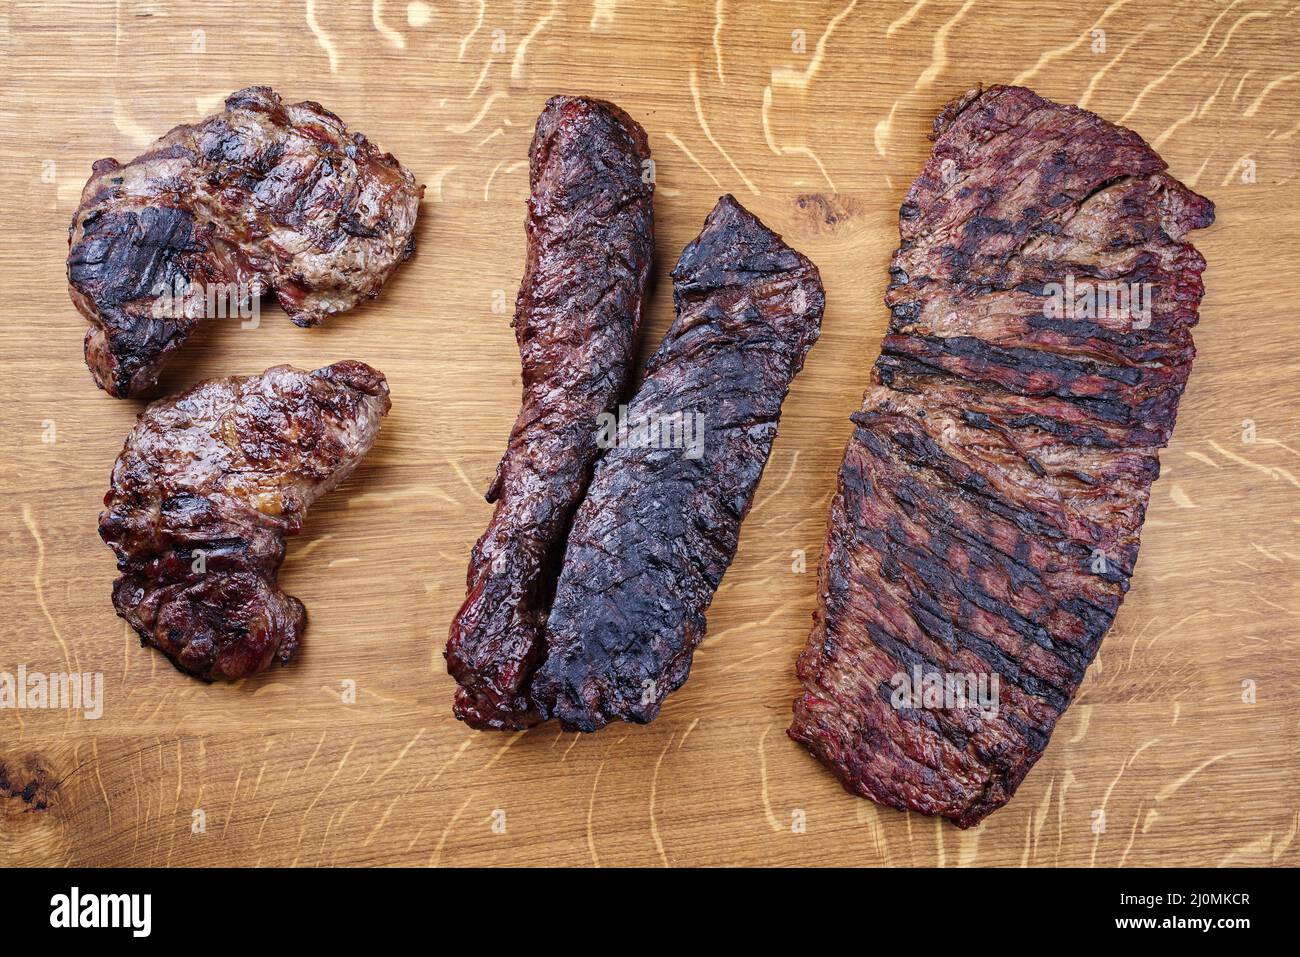 Traditional barbecue wagyu gourmet steaks served as top view on a wooden design board Stock Photo